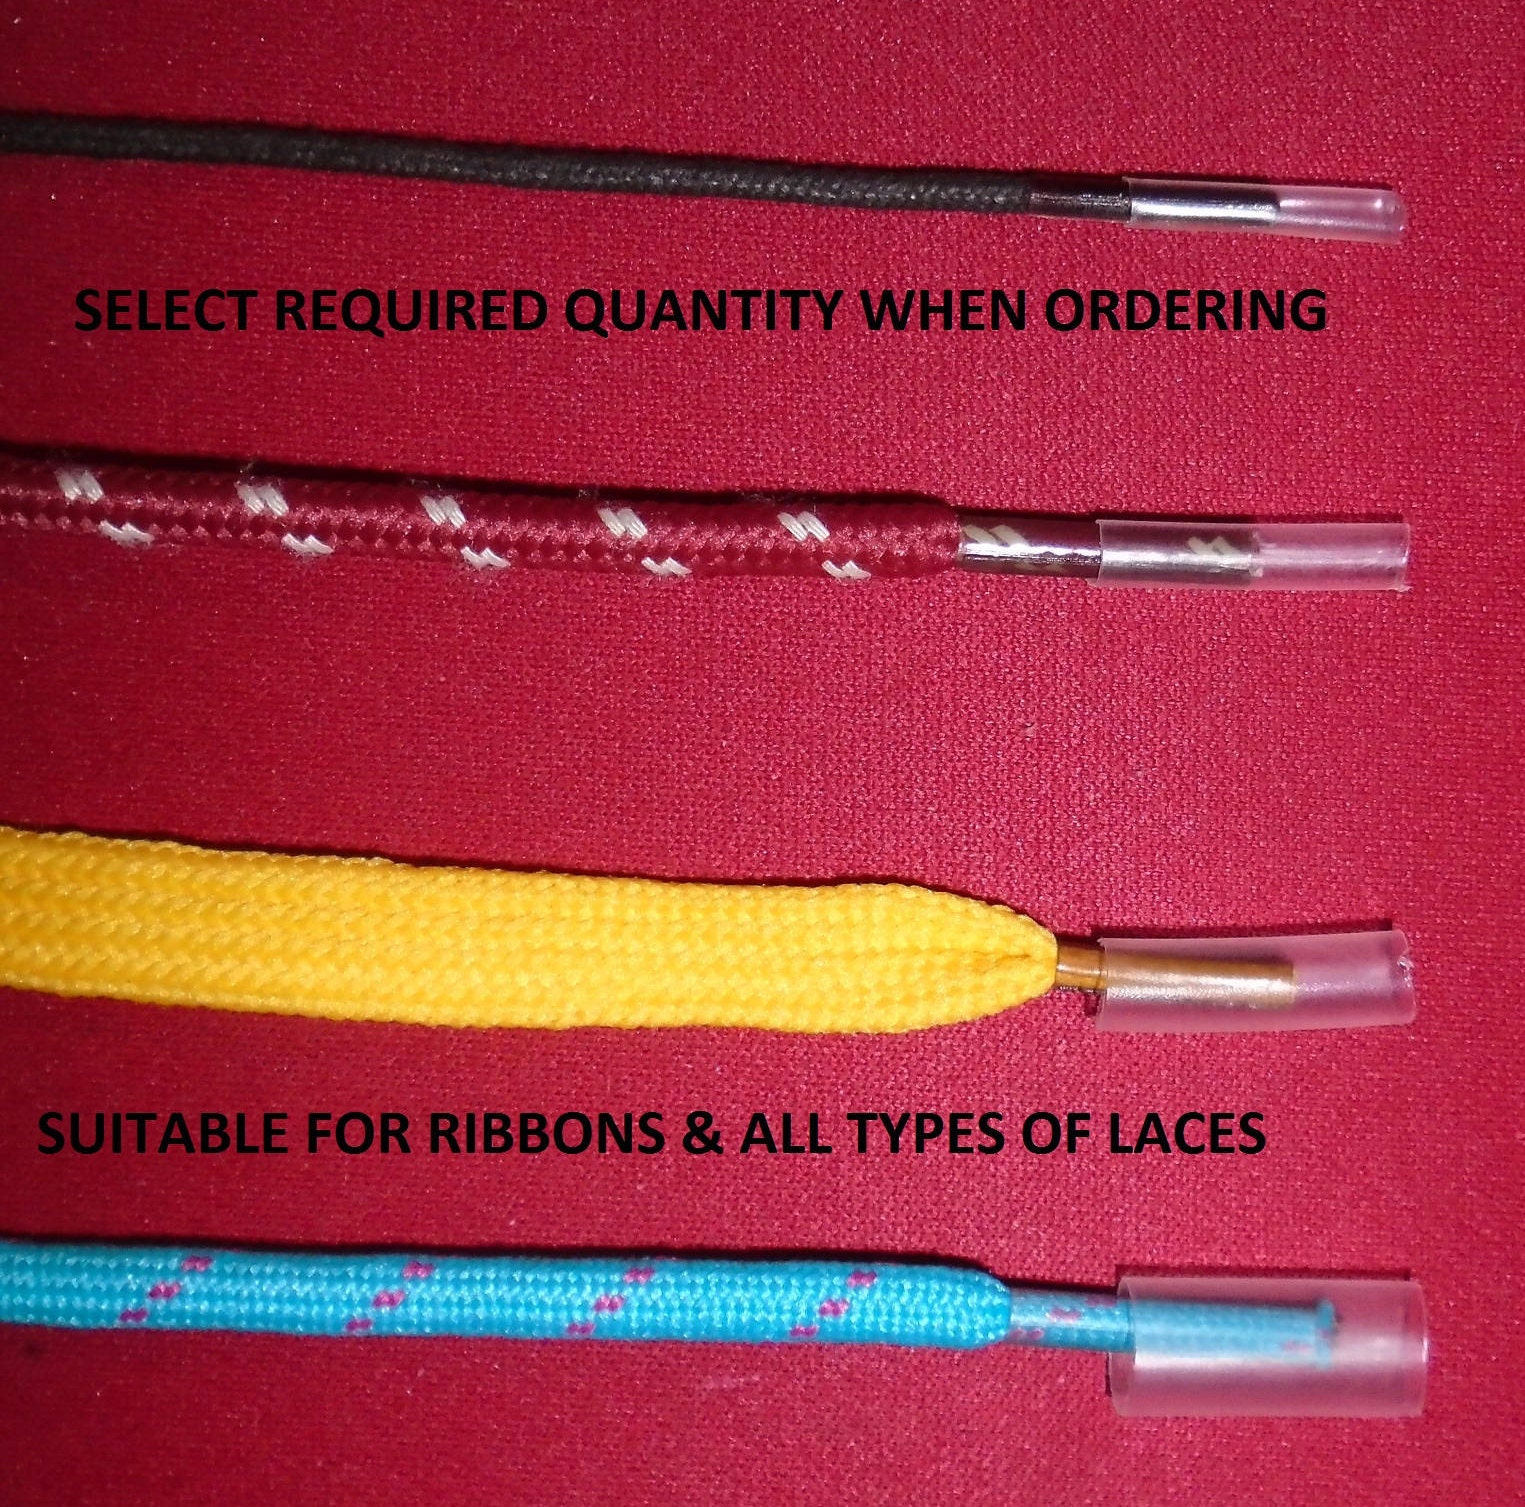 8 Clear Plastic Transparent Shoelace Aglets Tips With Heat Shrink Action.  Perfect for Crafting or Mending. 